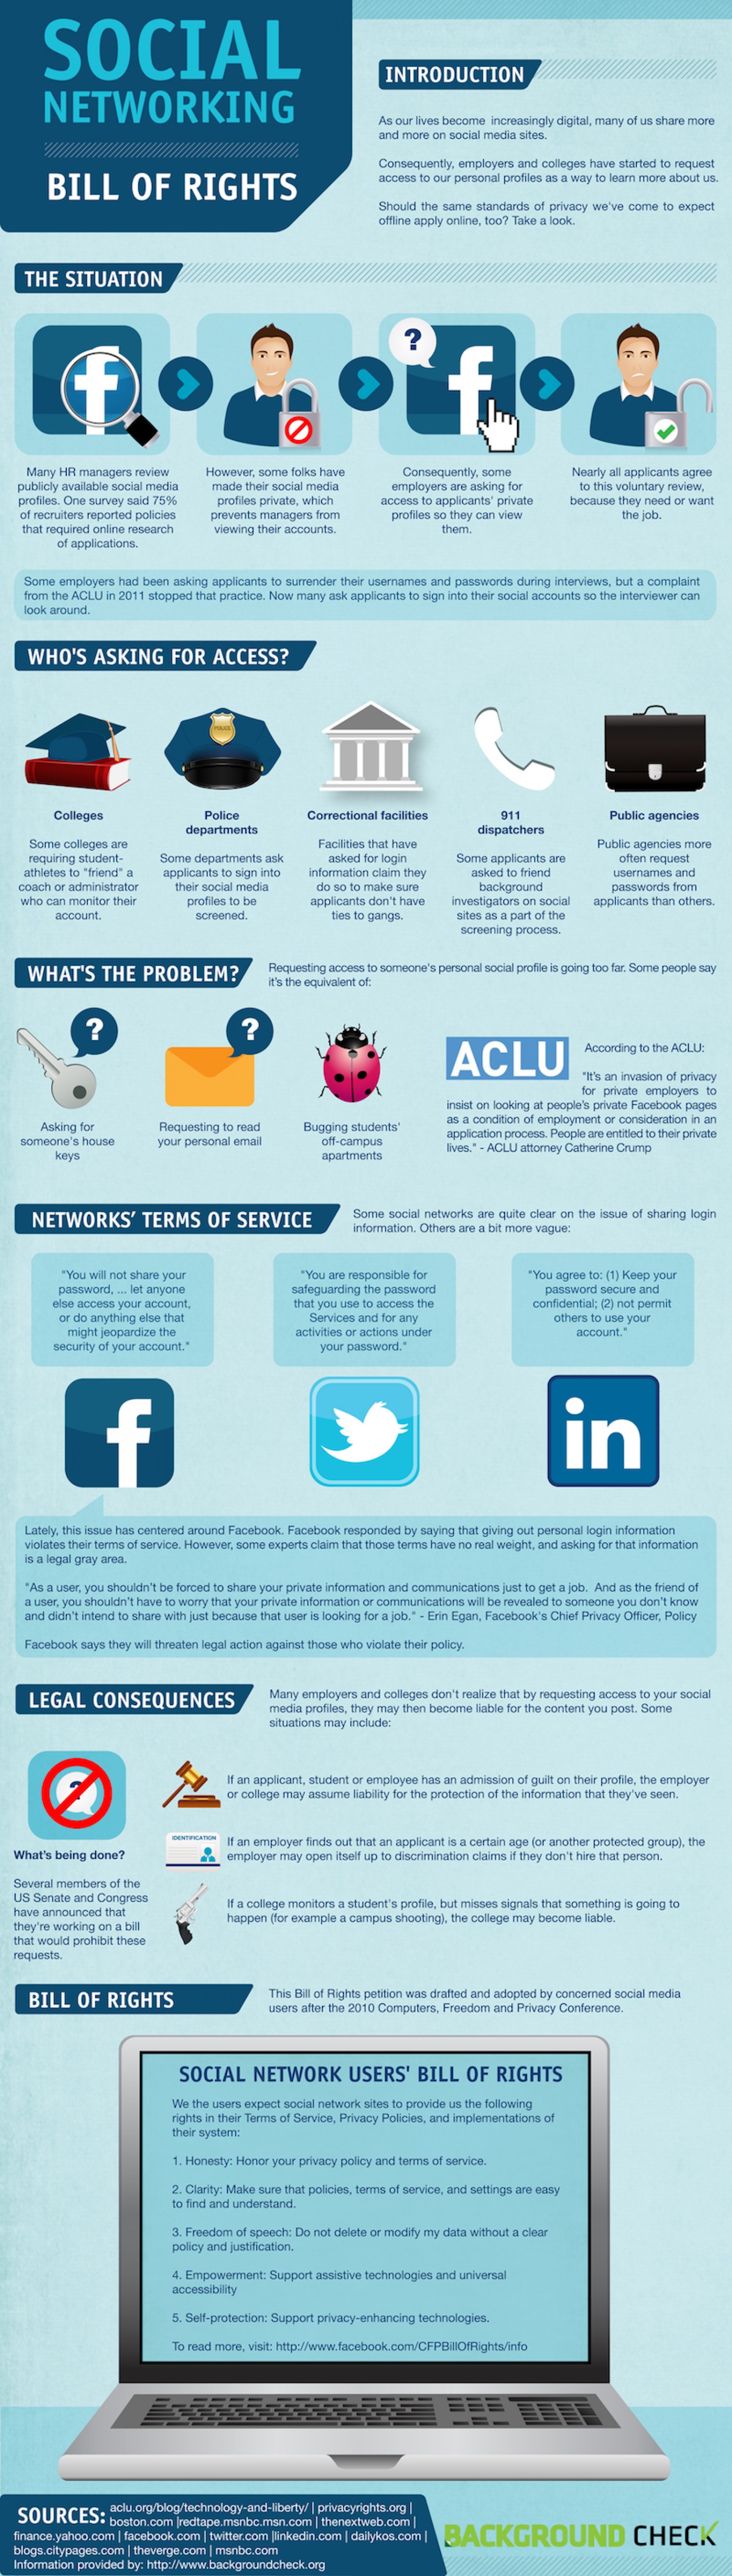 Social Networking Bill of Rights